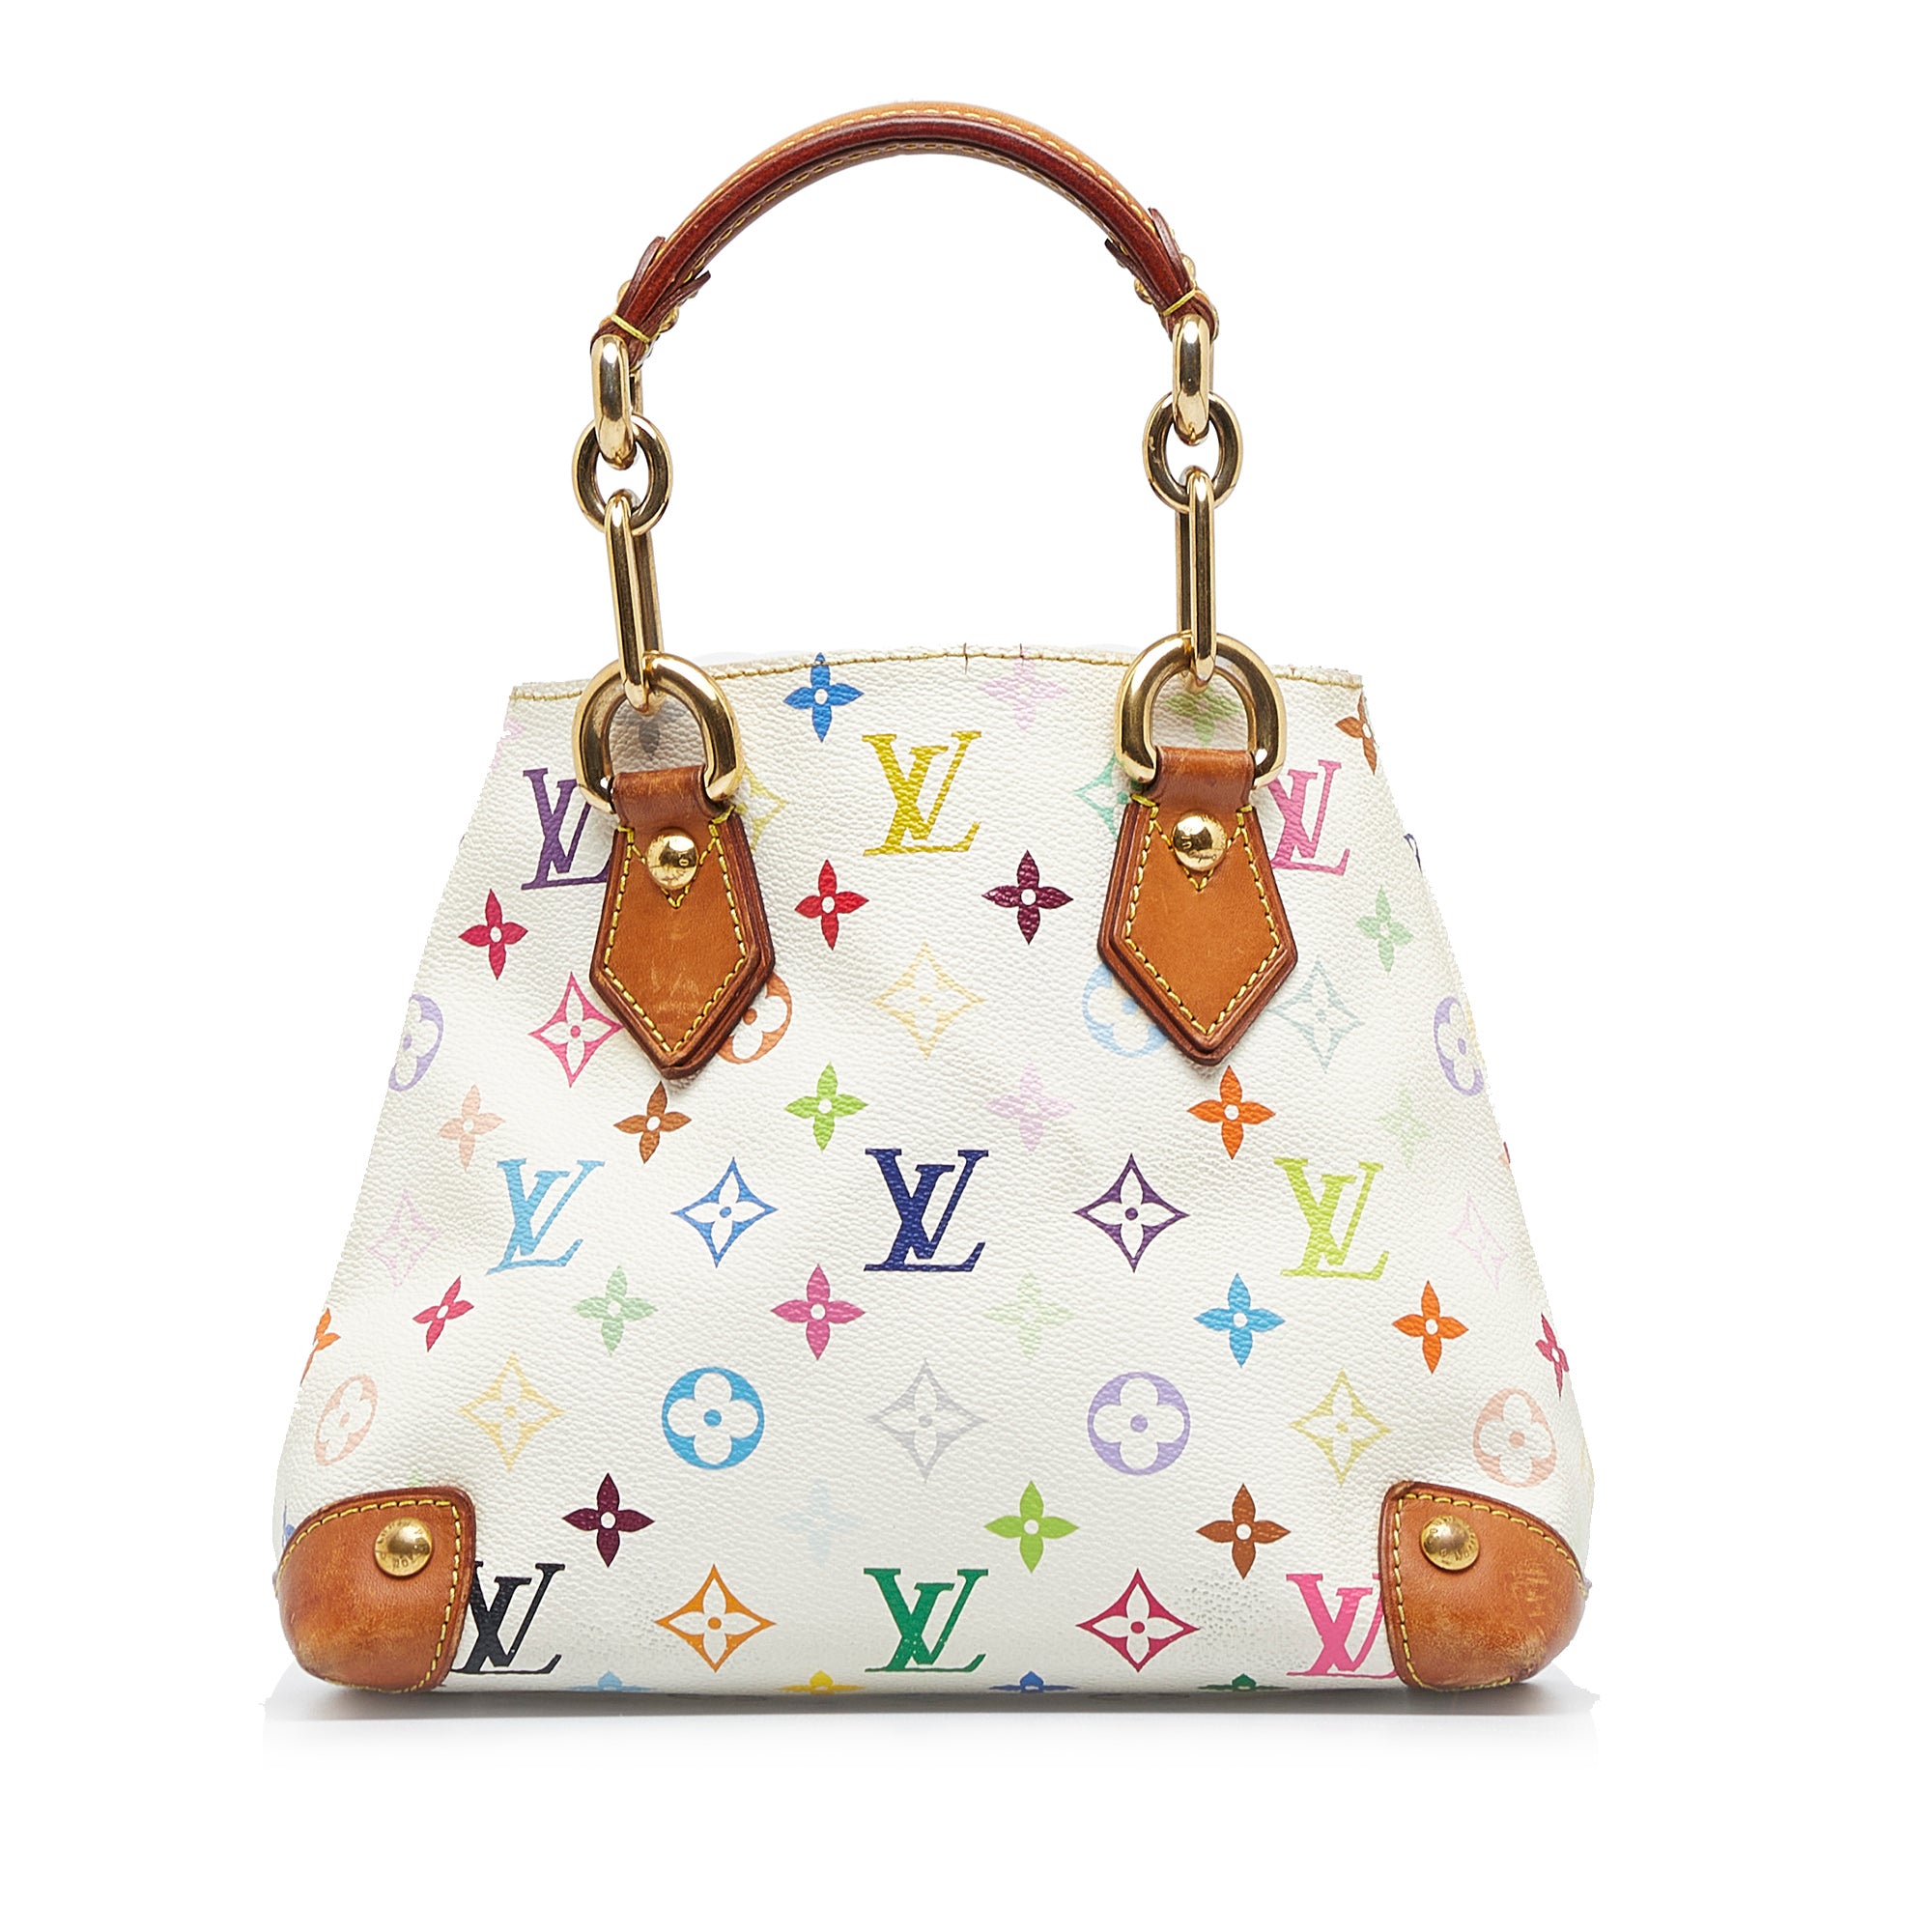 Louis Vuitton - Authenticated Mahina Handbag - Leather White for Women, Good Condition